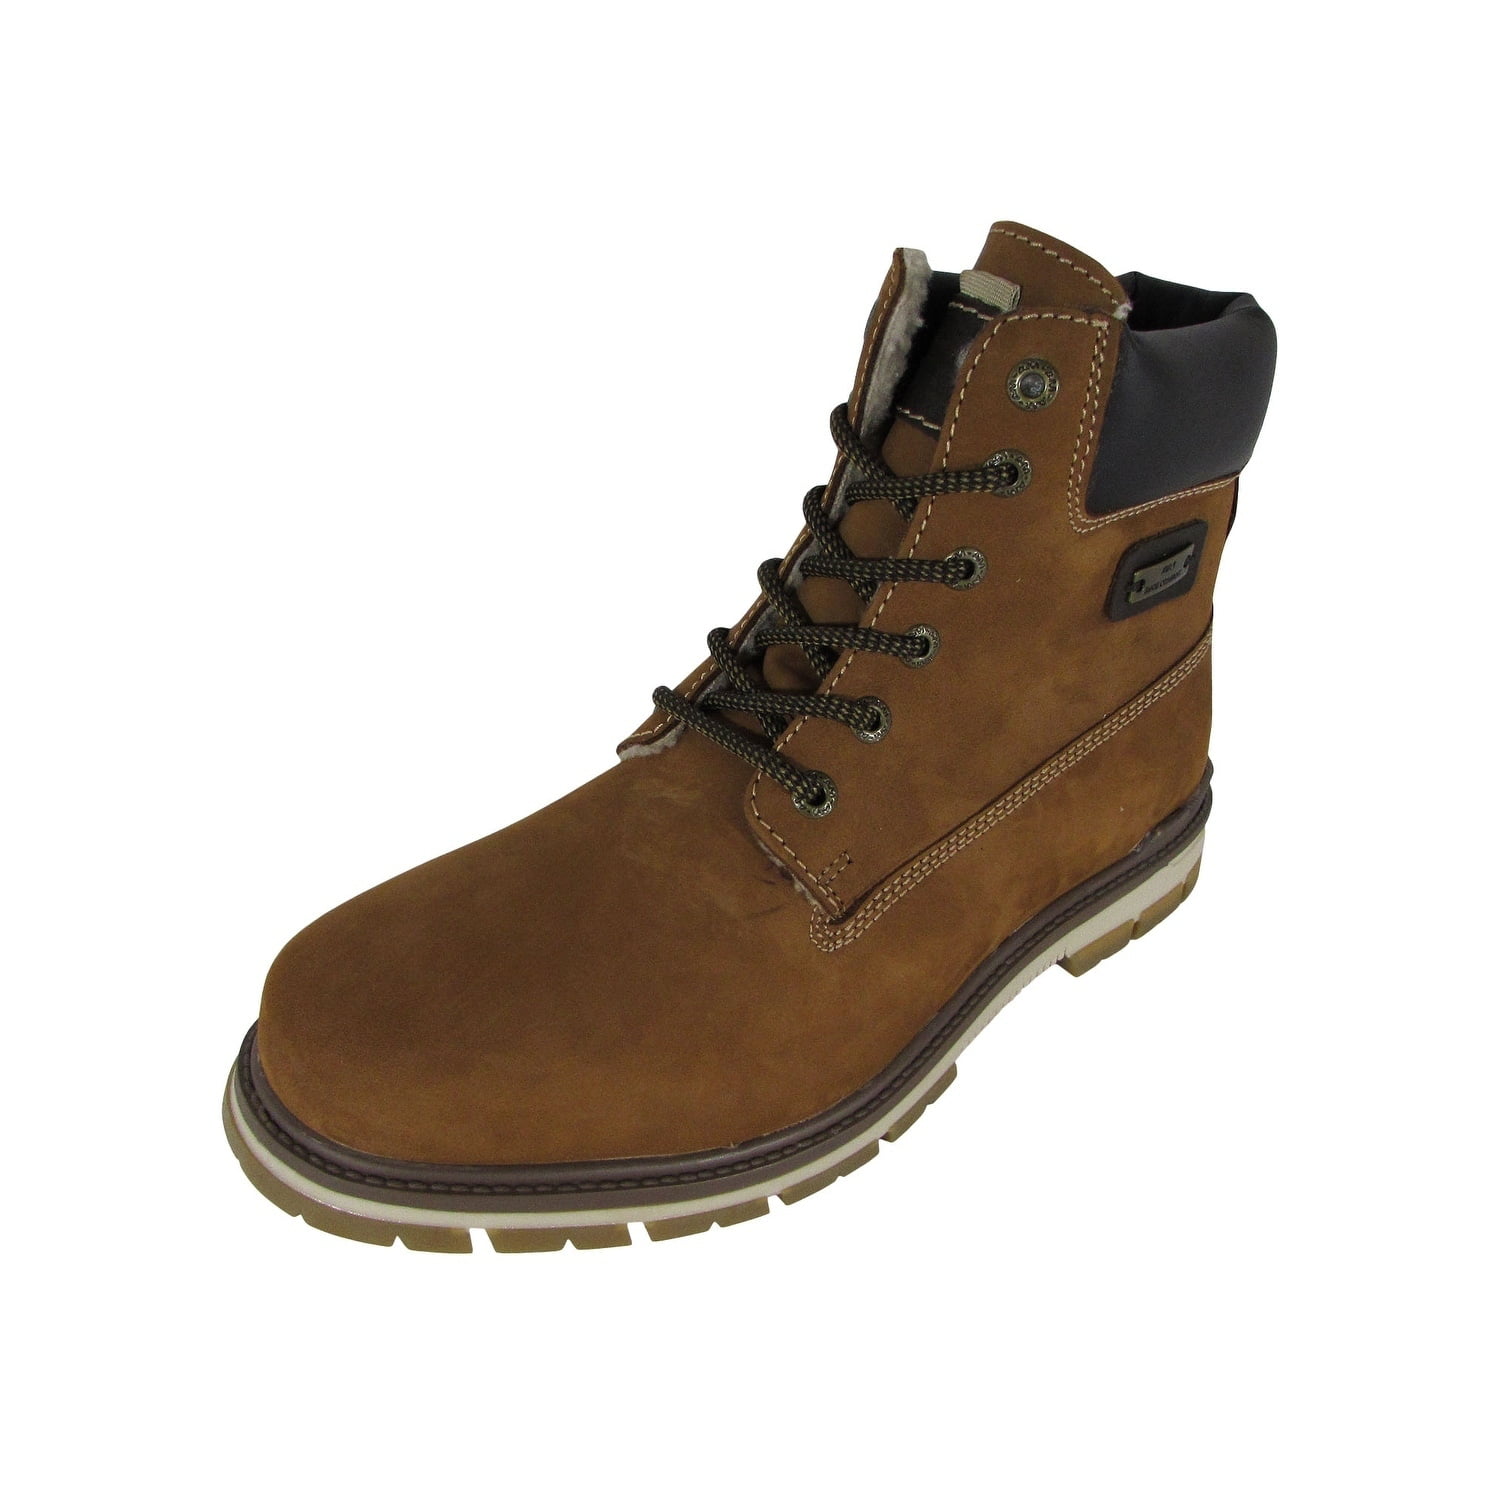 sewing machine jeans Unforeseen circumstances AM Shoes Mens Casual Lace Up Work Boot Shoes, Brown, US 11.5 - Walmart.com